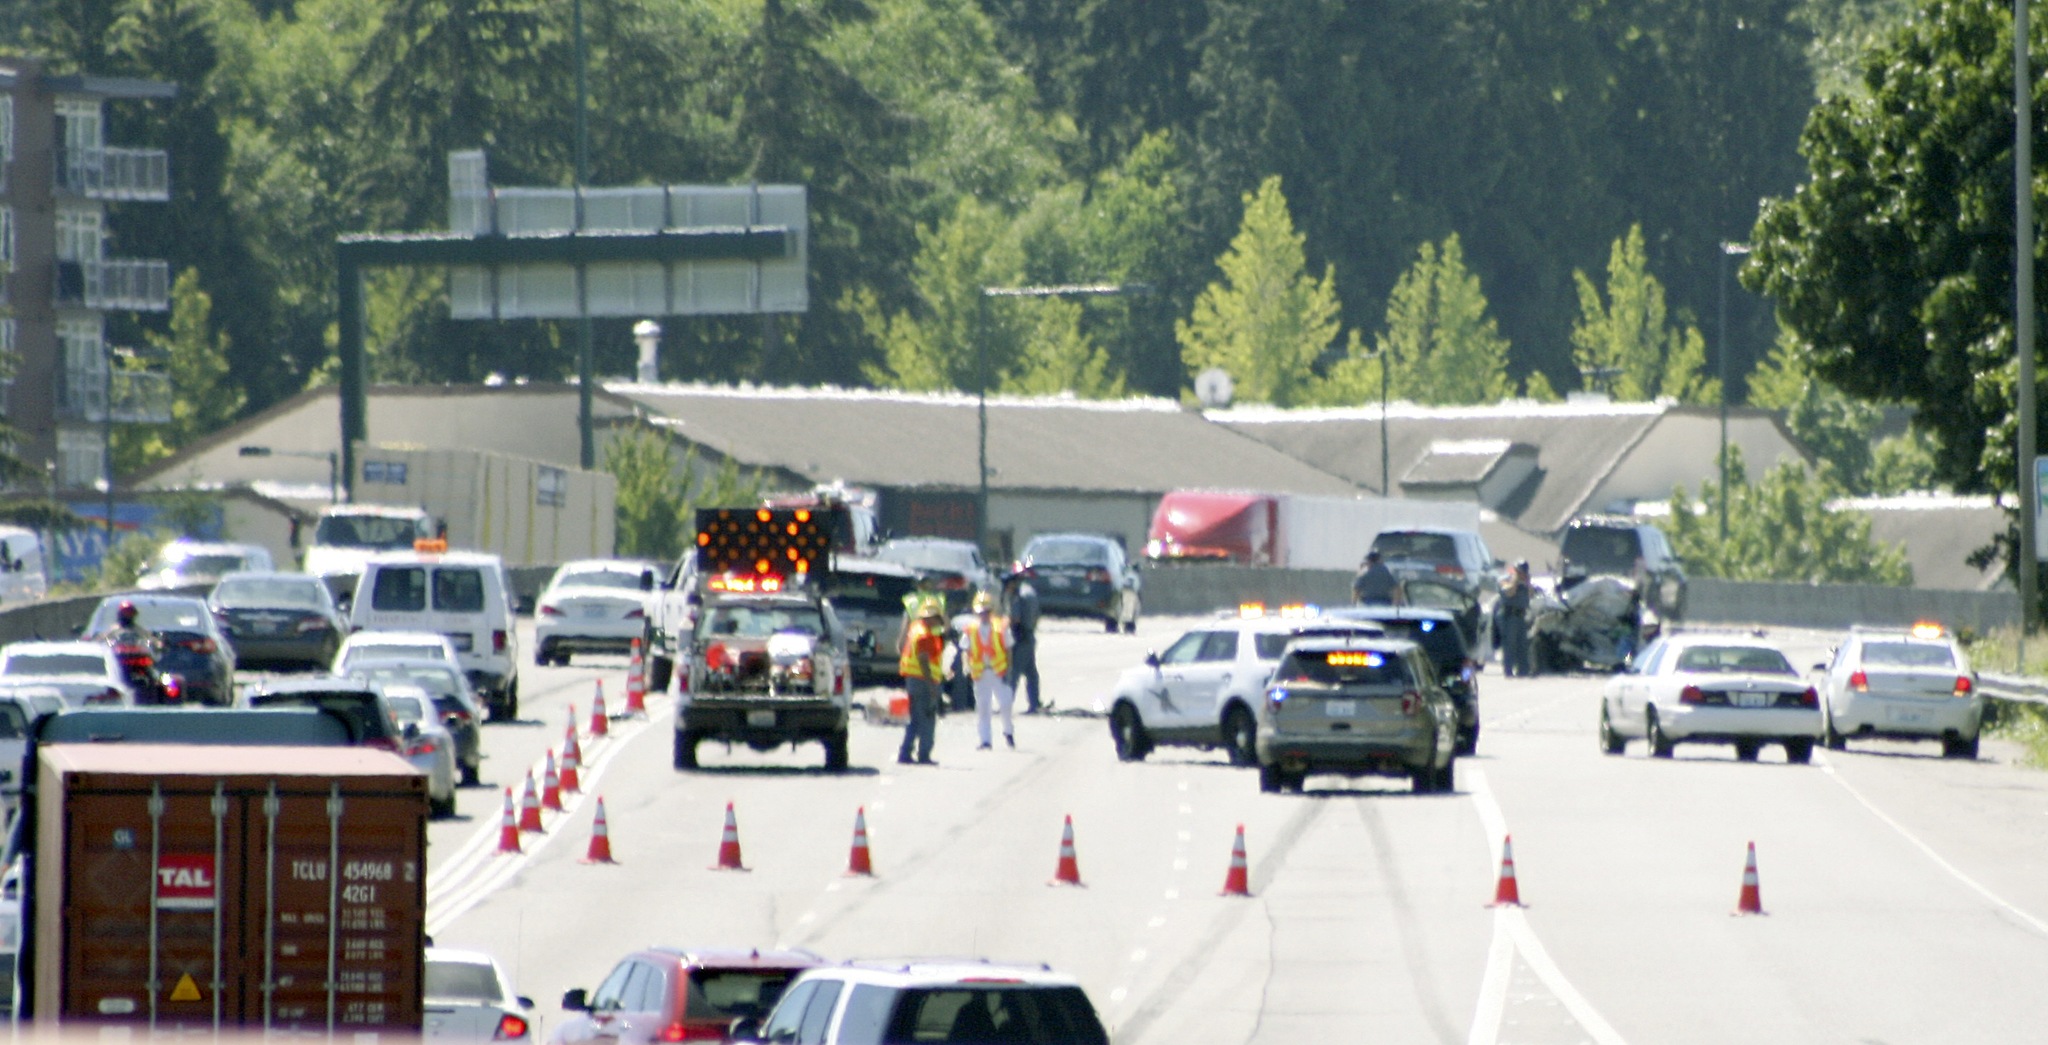 WSDOT: All lanes for southbound I-405 open | UPDATE